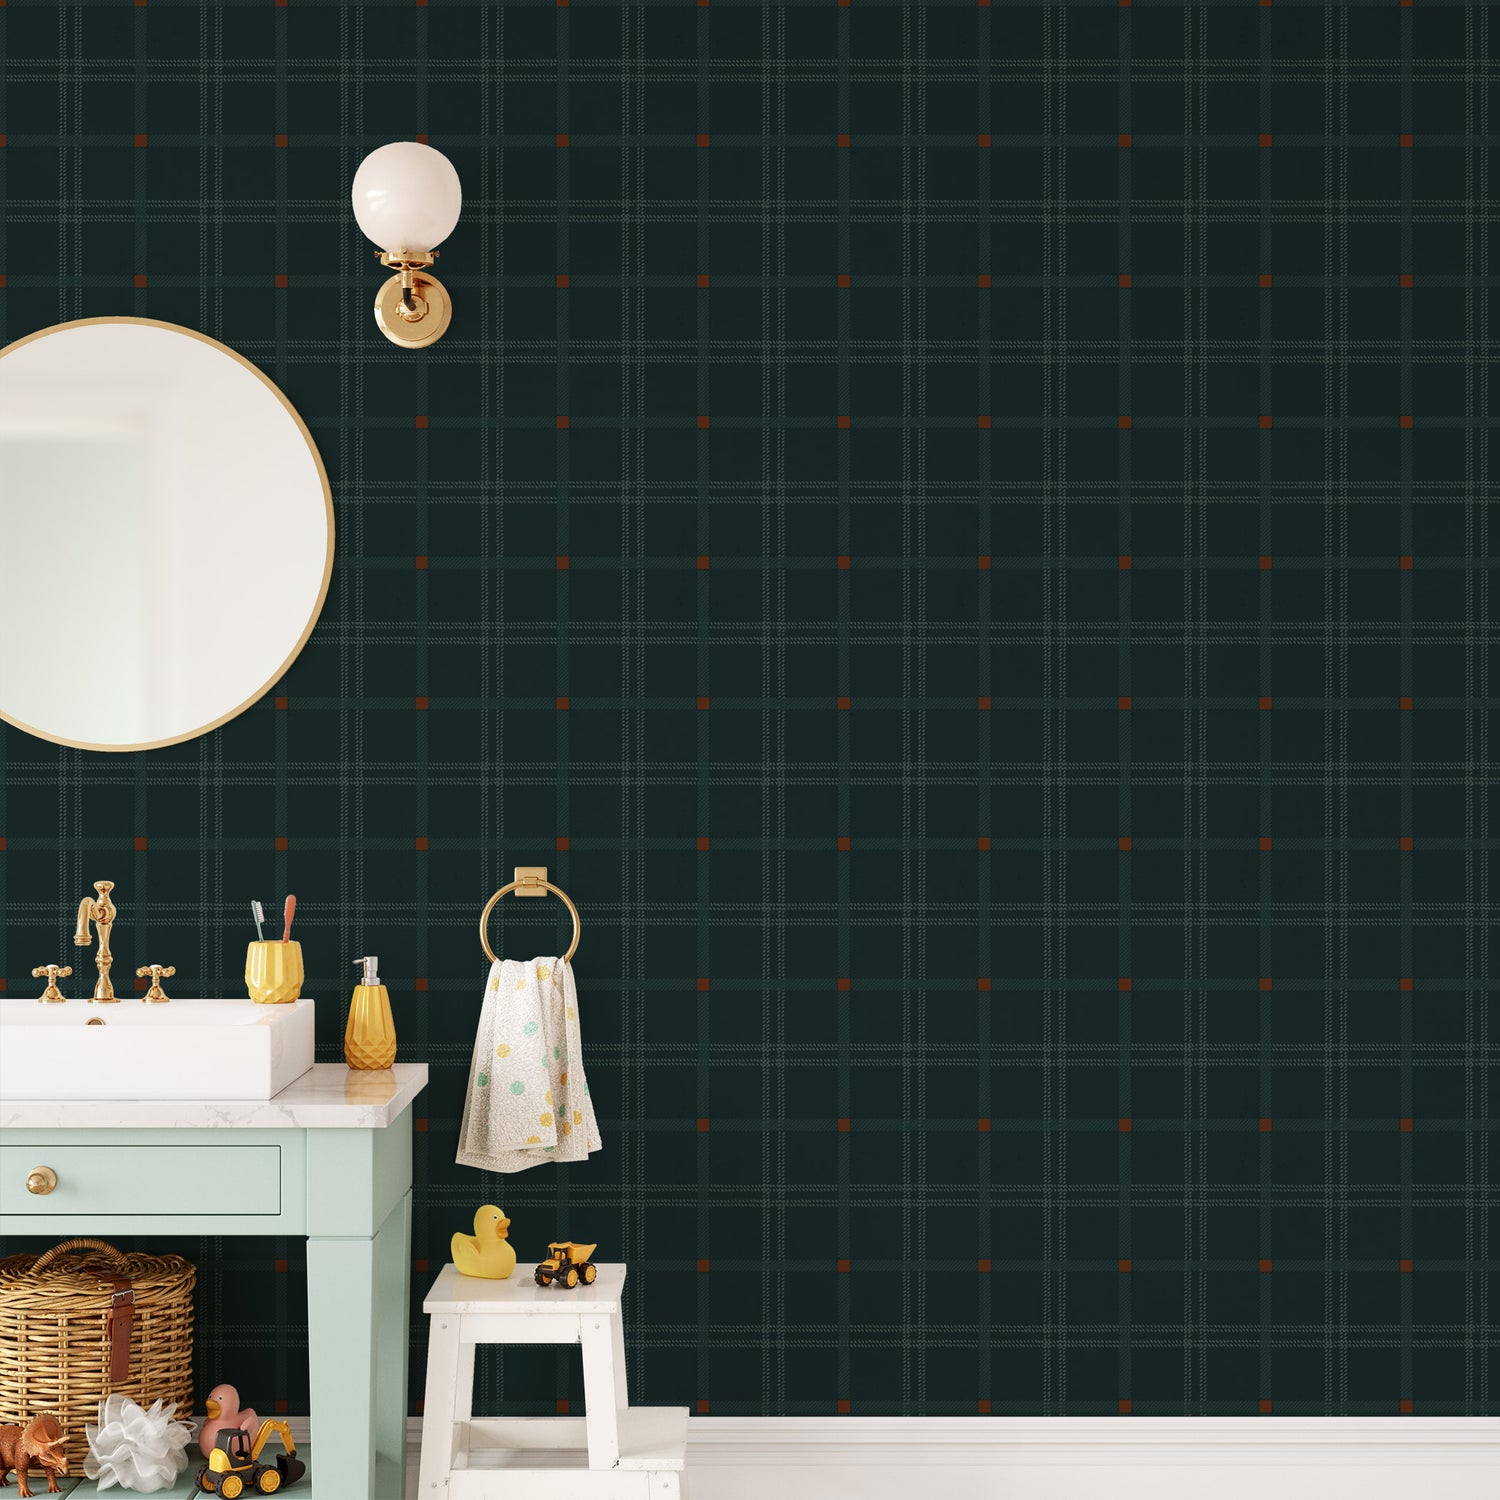 Bathroom featuring Cayla Naylor Anchorage- Forest Peel and Stick Wallpaper - a plaid pattern